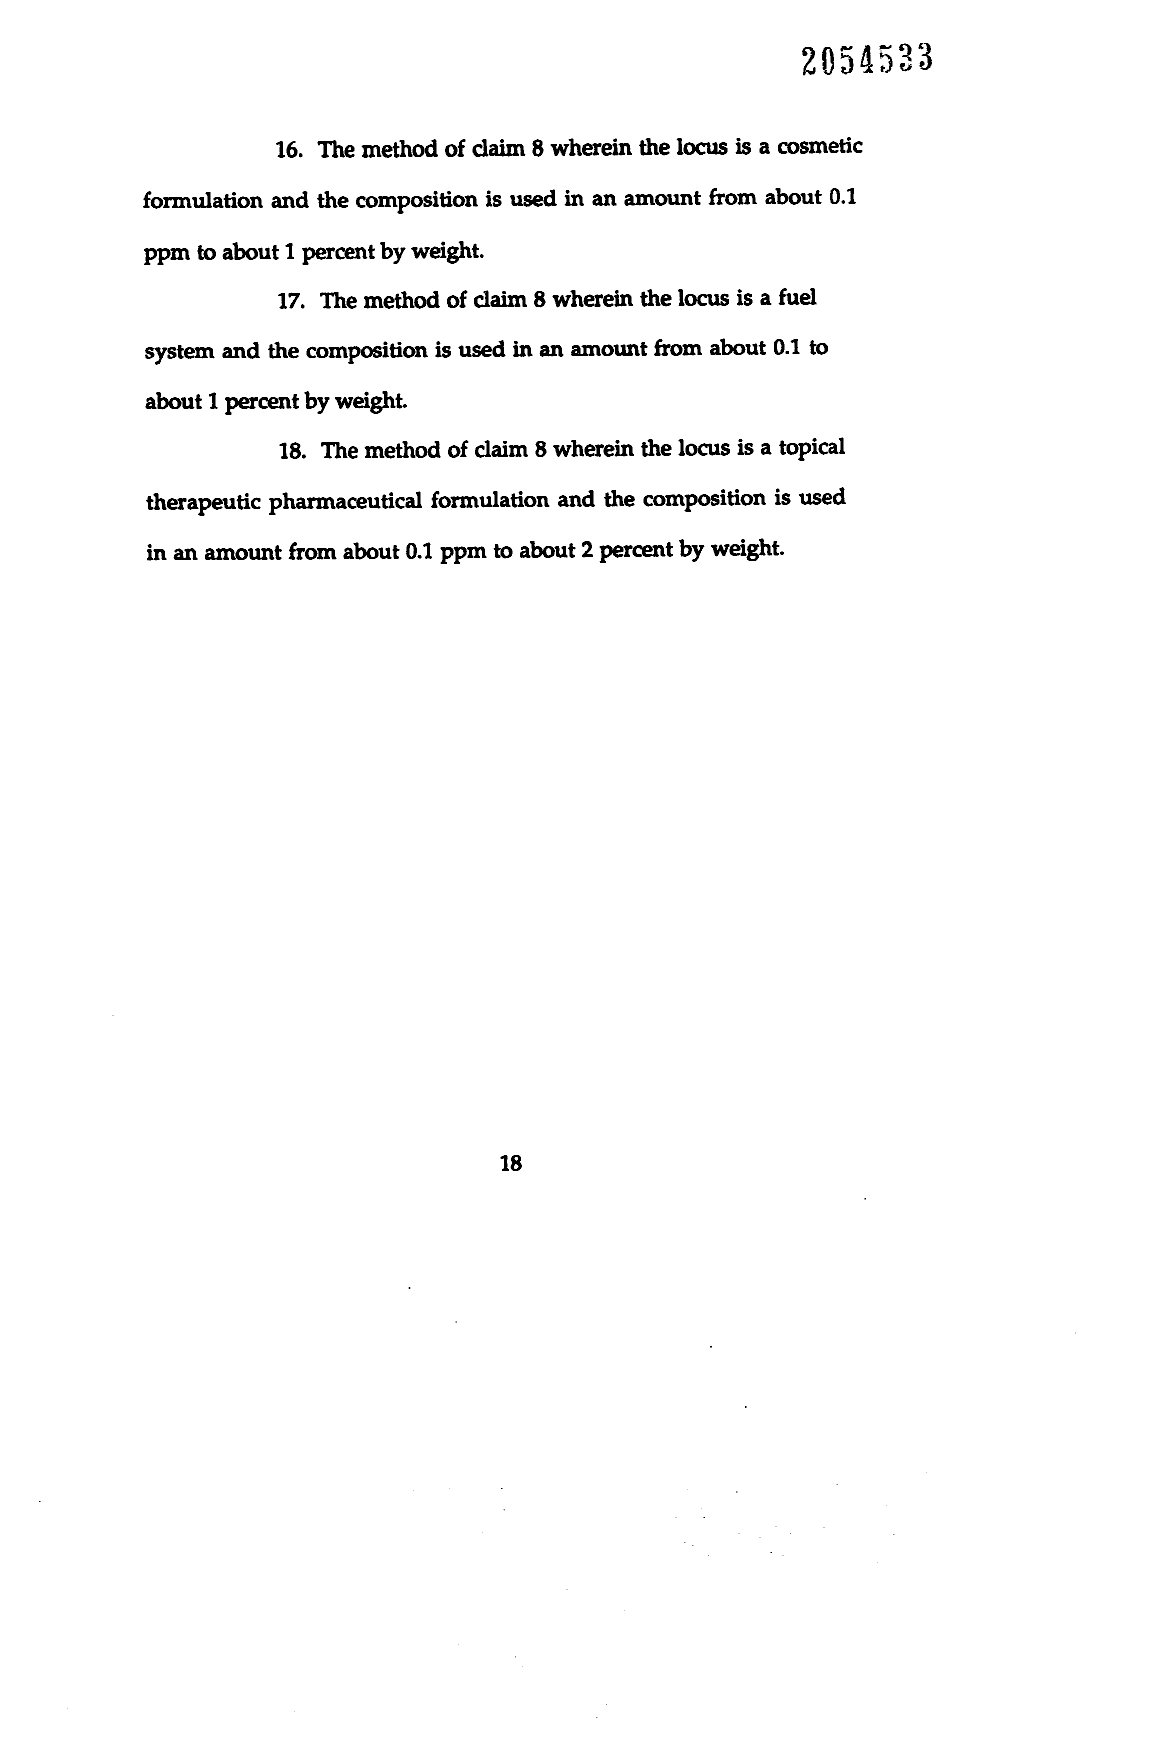 Canadian Patent Document 2054533. Claims 20010606. Image 4 of 4